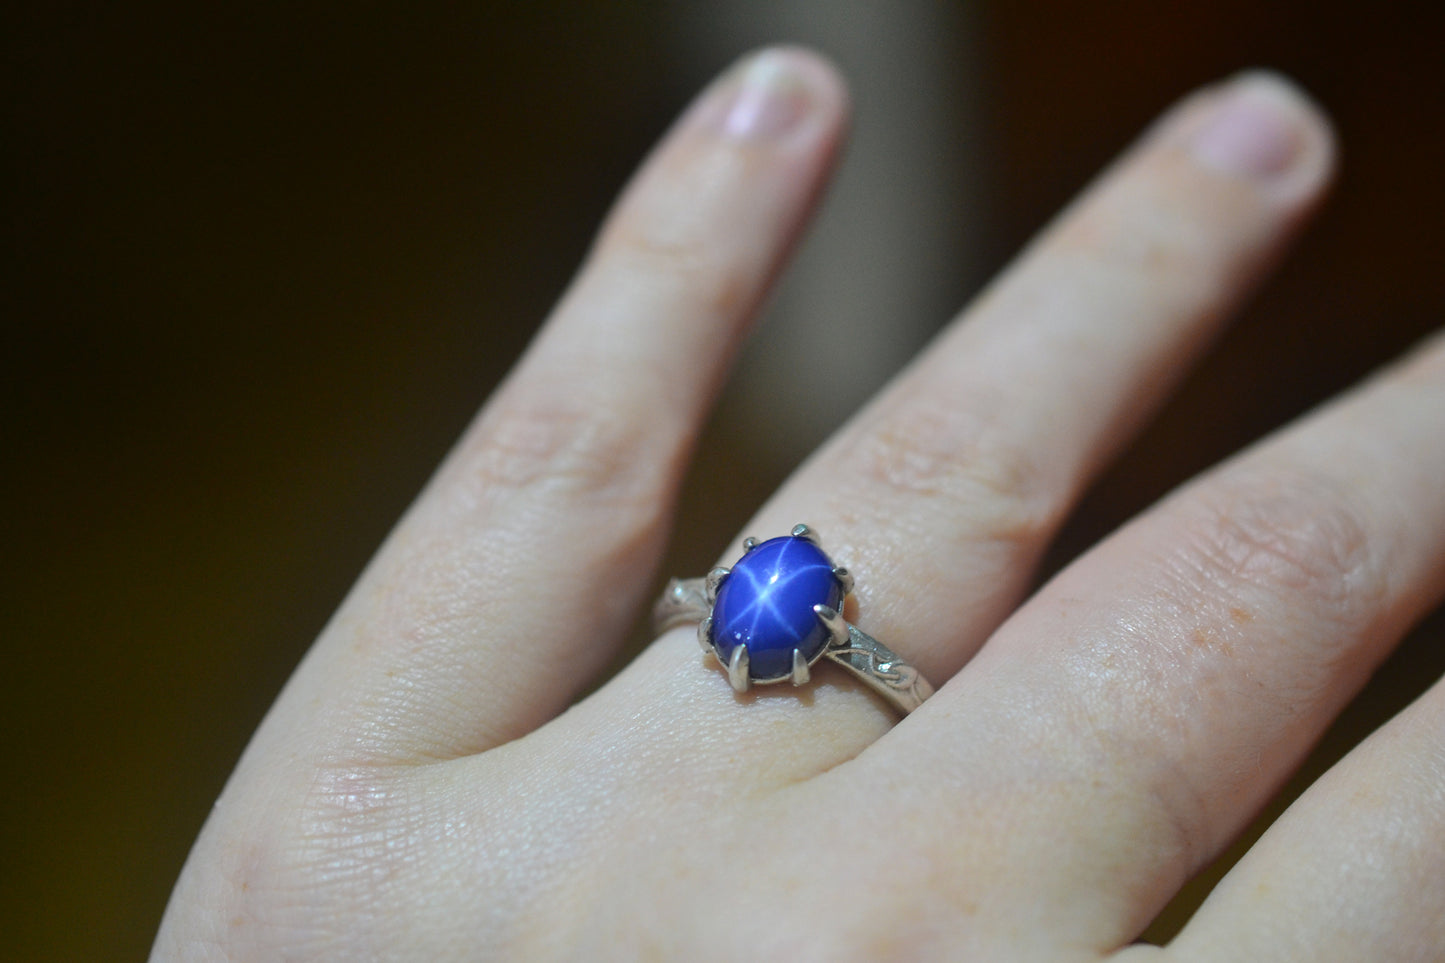 Blue Star Sapphire Statement Ring in Silver